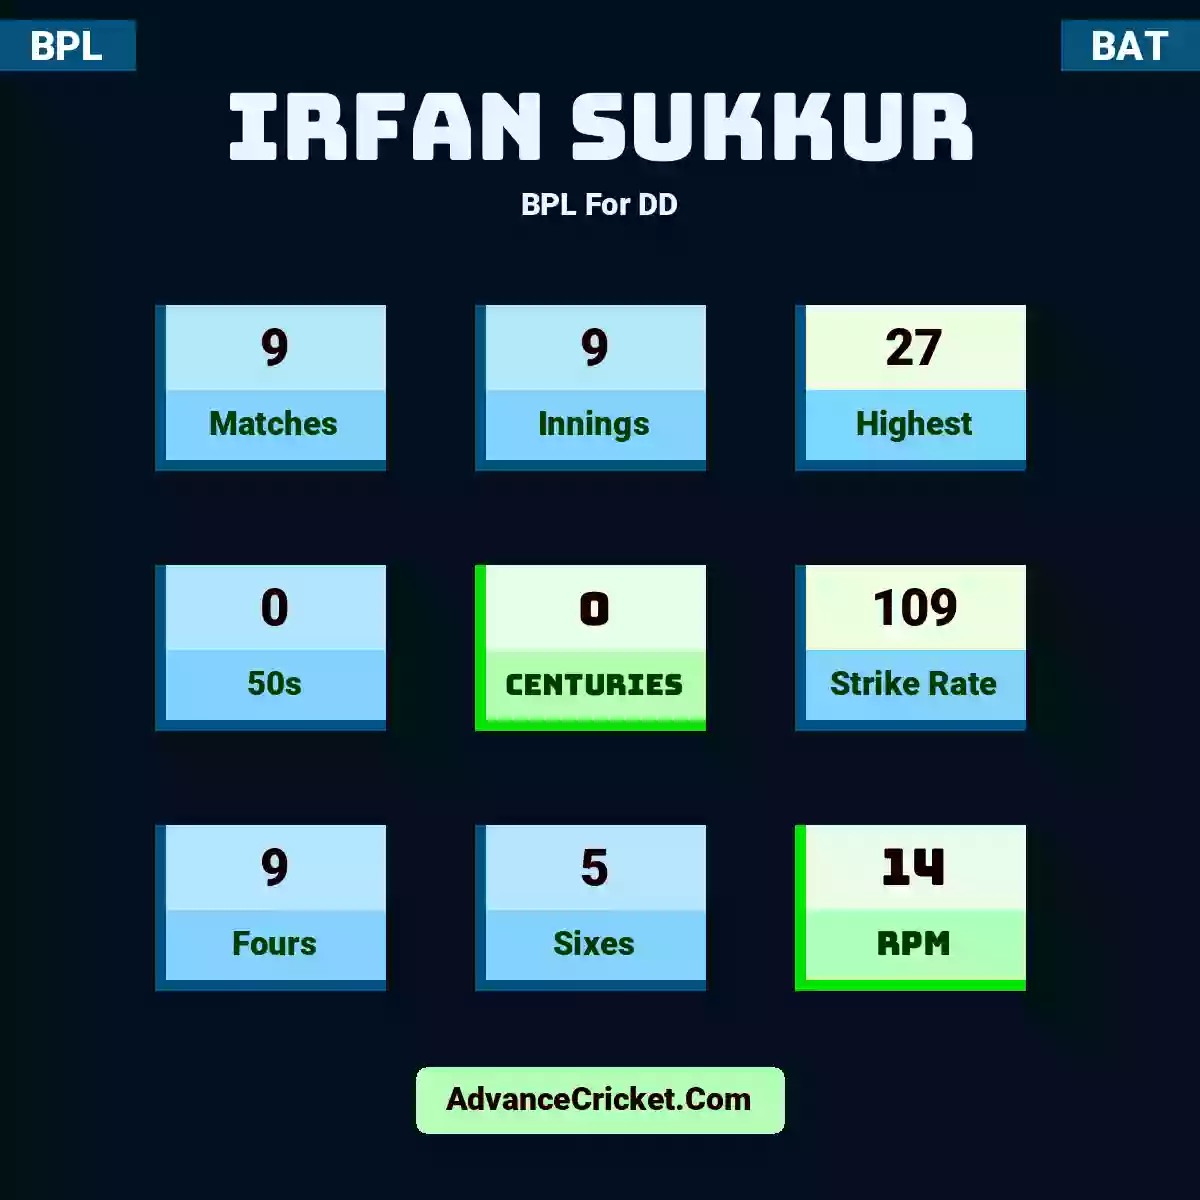 Irfan Sukkur BPL  For DD, Irfan Sukkur played 9 matches, scored 27 runs as highest, 0 half-centuries, and 0 centuries, with a strike rate of 109. I.Sukkur hit 9 fours and 5 sixes, with an RPM of 14.